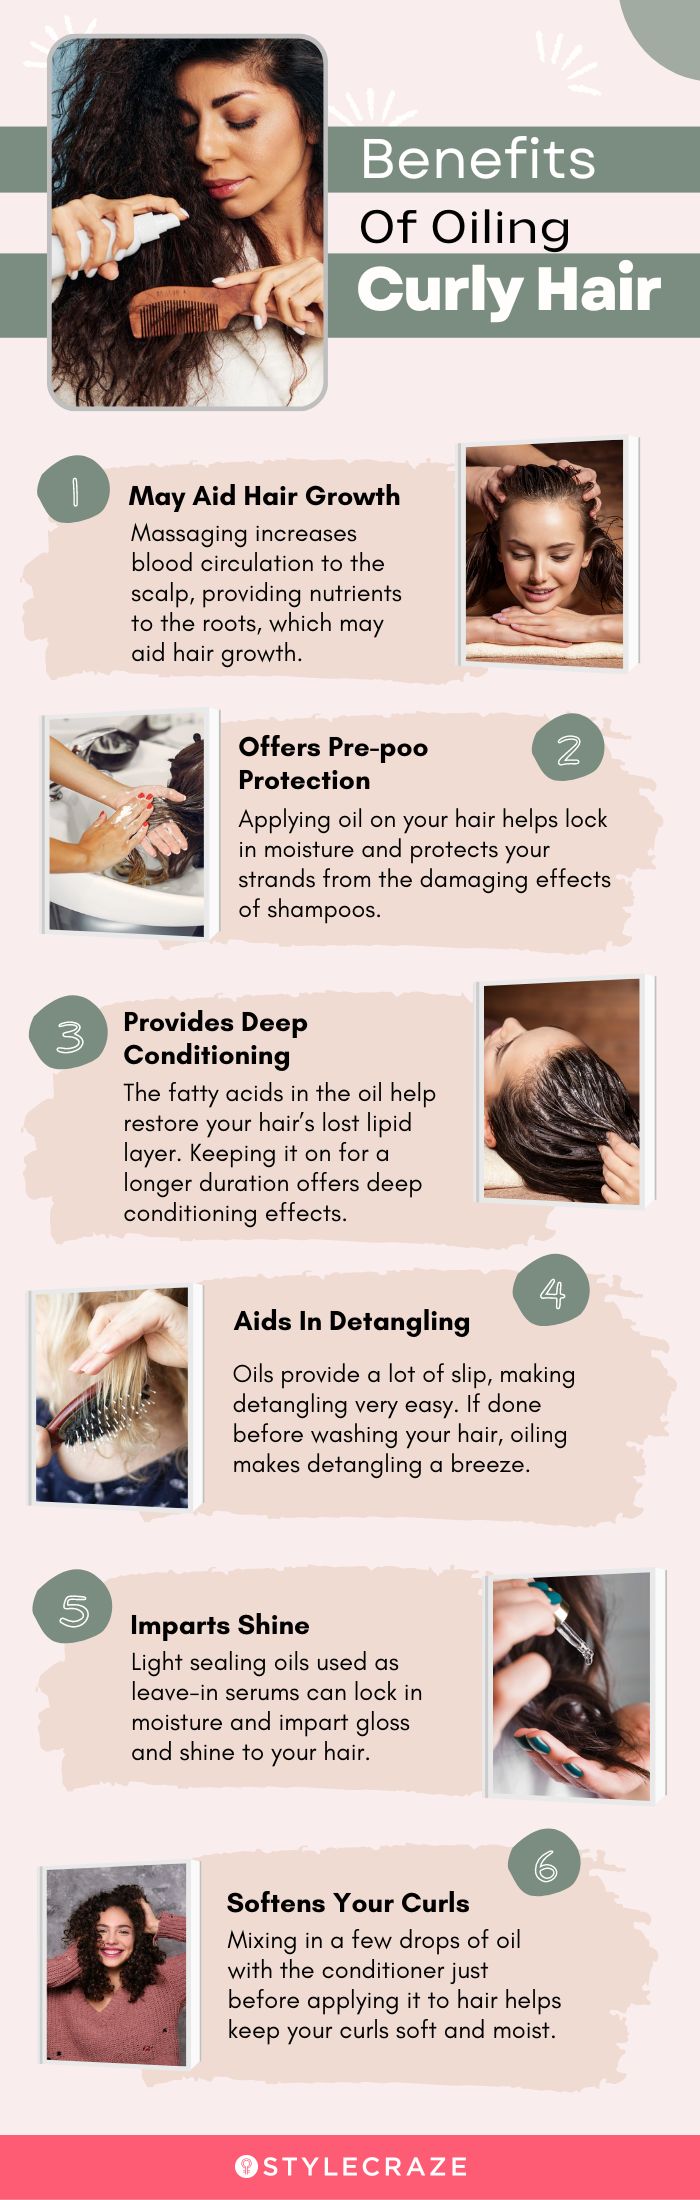 benefits of oiling curly hair (infographic)